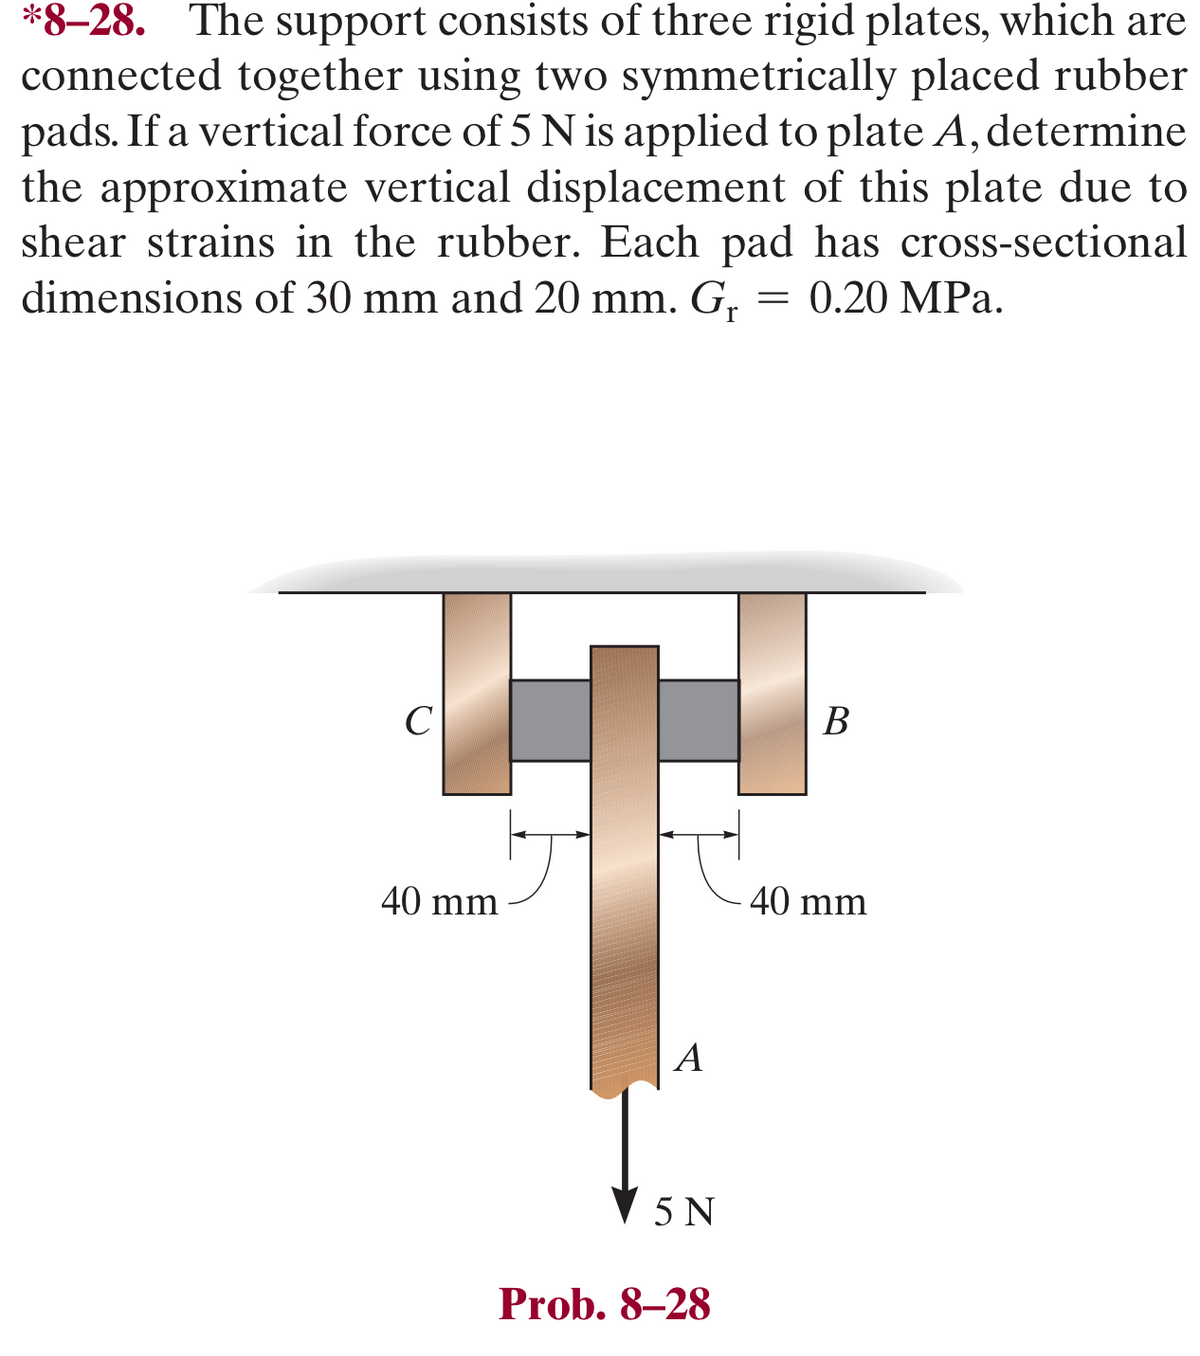 *8-28. The support consists of three rigid plates, which are
connected together using two symmetrically placed rubber
pads. If a vertical force of 5 N is applied to plate A, determine
the approximate vertical displacement of this plate due to
shear strains in the rubber. Each pad has cross-sectional
dimensions of 30 mm and 20 mm. Gr = 0.20 MPa.
C
40 mm
A
5 N
Prob. 8-28
B
40 mm